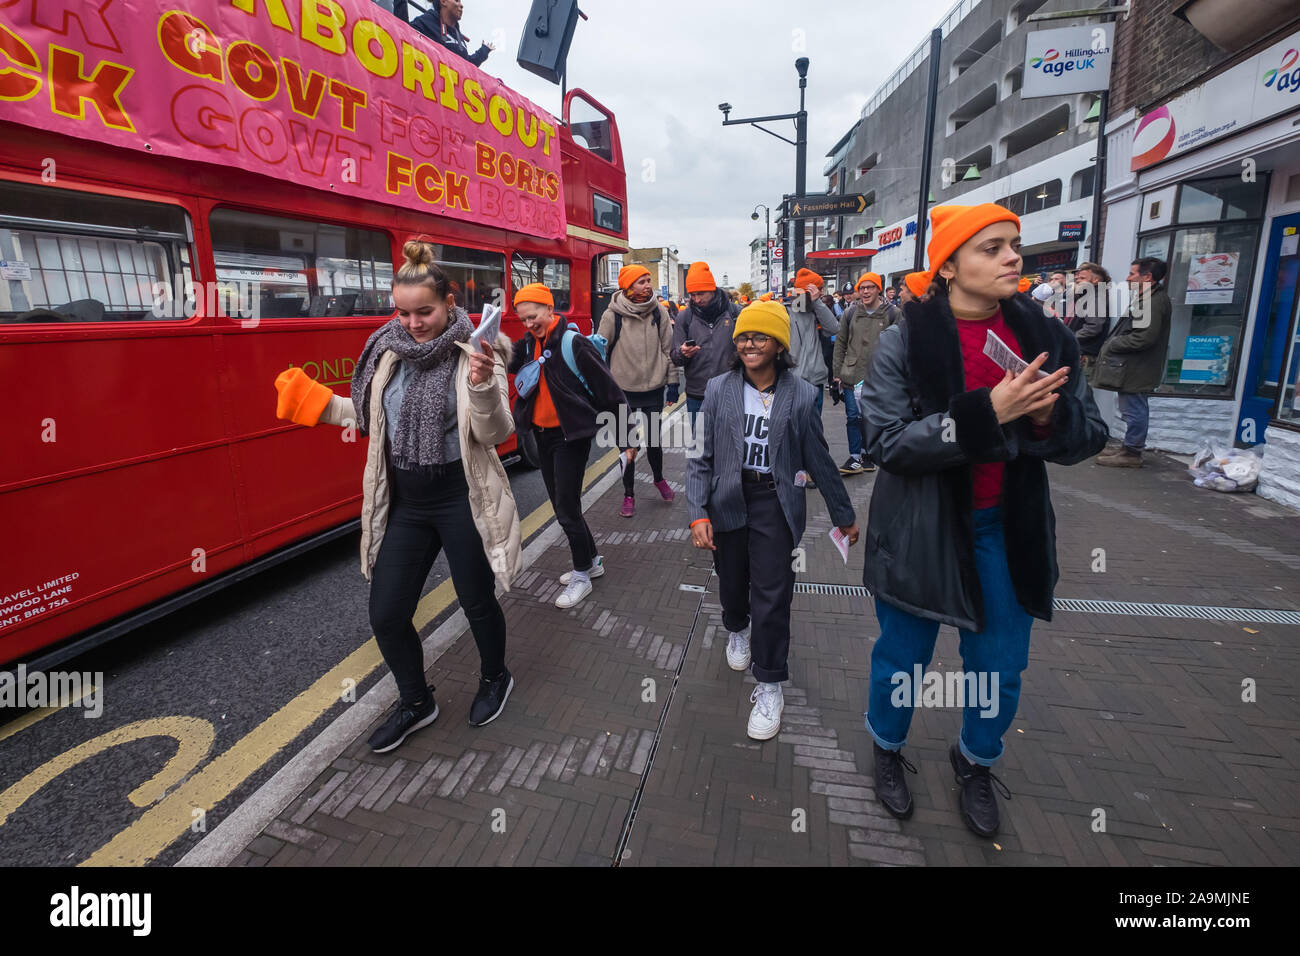 London, UK. 16th November 2019. The bus moves off and people dance along with it. Protesters from FCKBoris in orange knitted hats walk through Uxbridge shopping centre handing out fliers urging everyone to register and vote against Boris Johnson and kick him out for his racist, elitist politics. They marched with a sound system on a bus to Brunel University to persuade students. Johnson had a majority of just over 5 thousand in 2017 and Labour candidate Ali Milani has strong hopes of beating him and the other 10 candidates. Peter Marshall/Alamy Live News Stock Photo